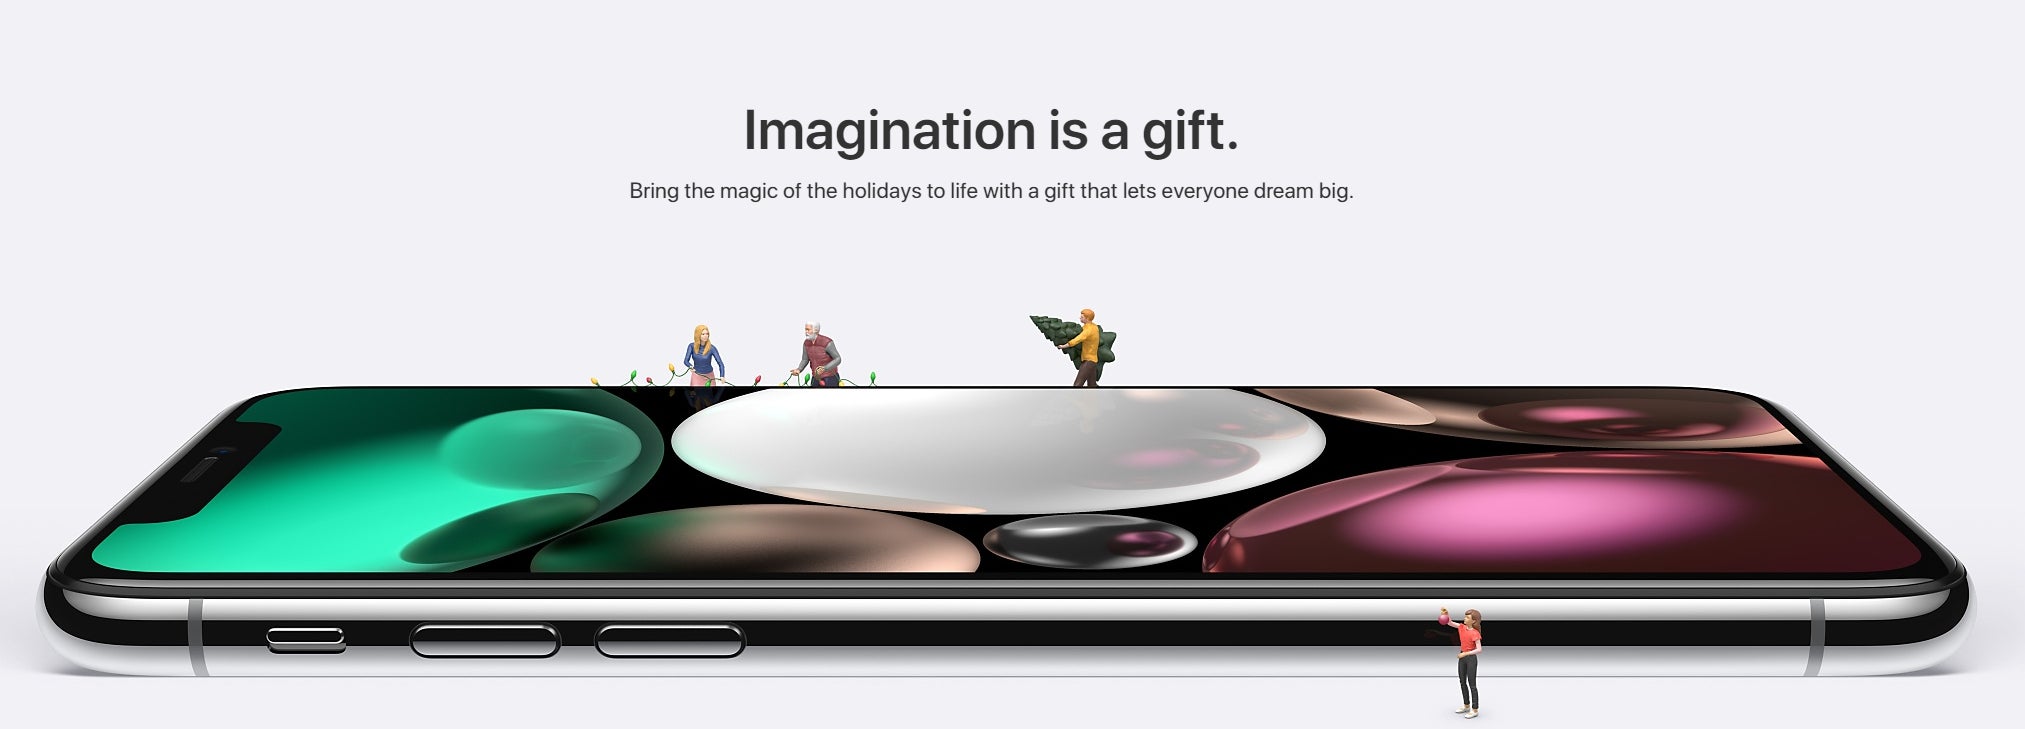 iPhone X takes the spotlight in Apple's 2017 holiday gift guide